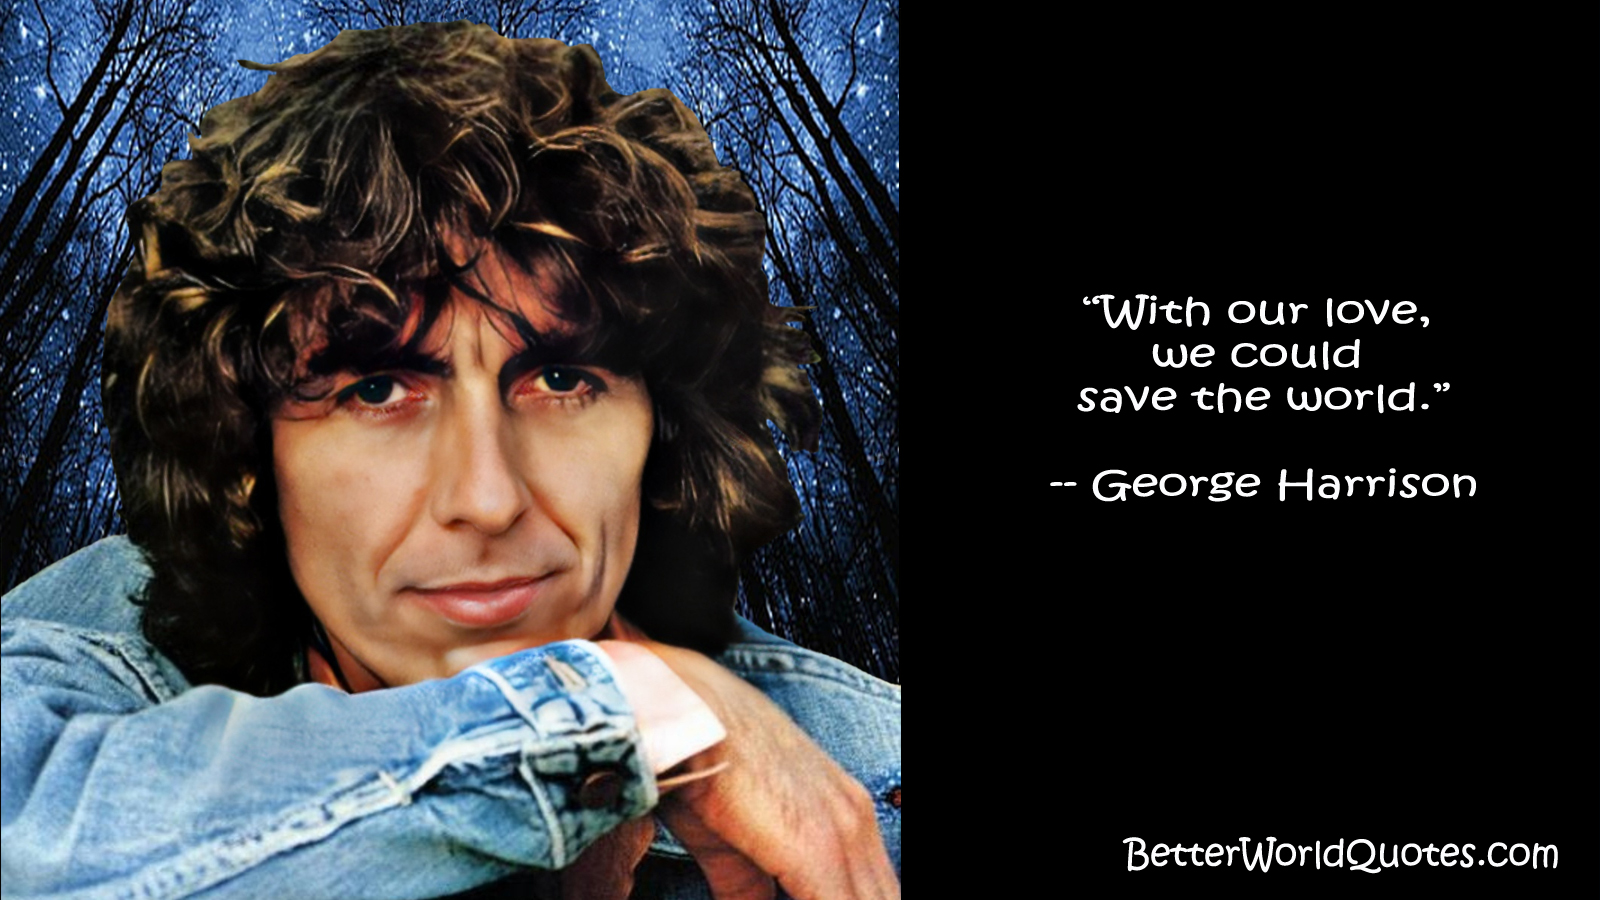 George Harrison: With our love, we could save the world.